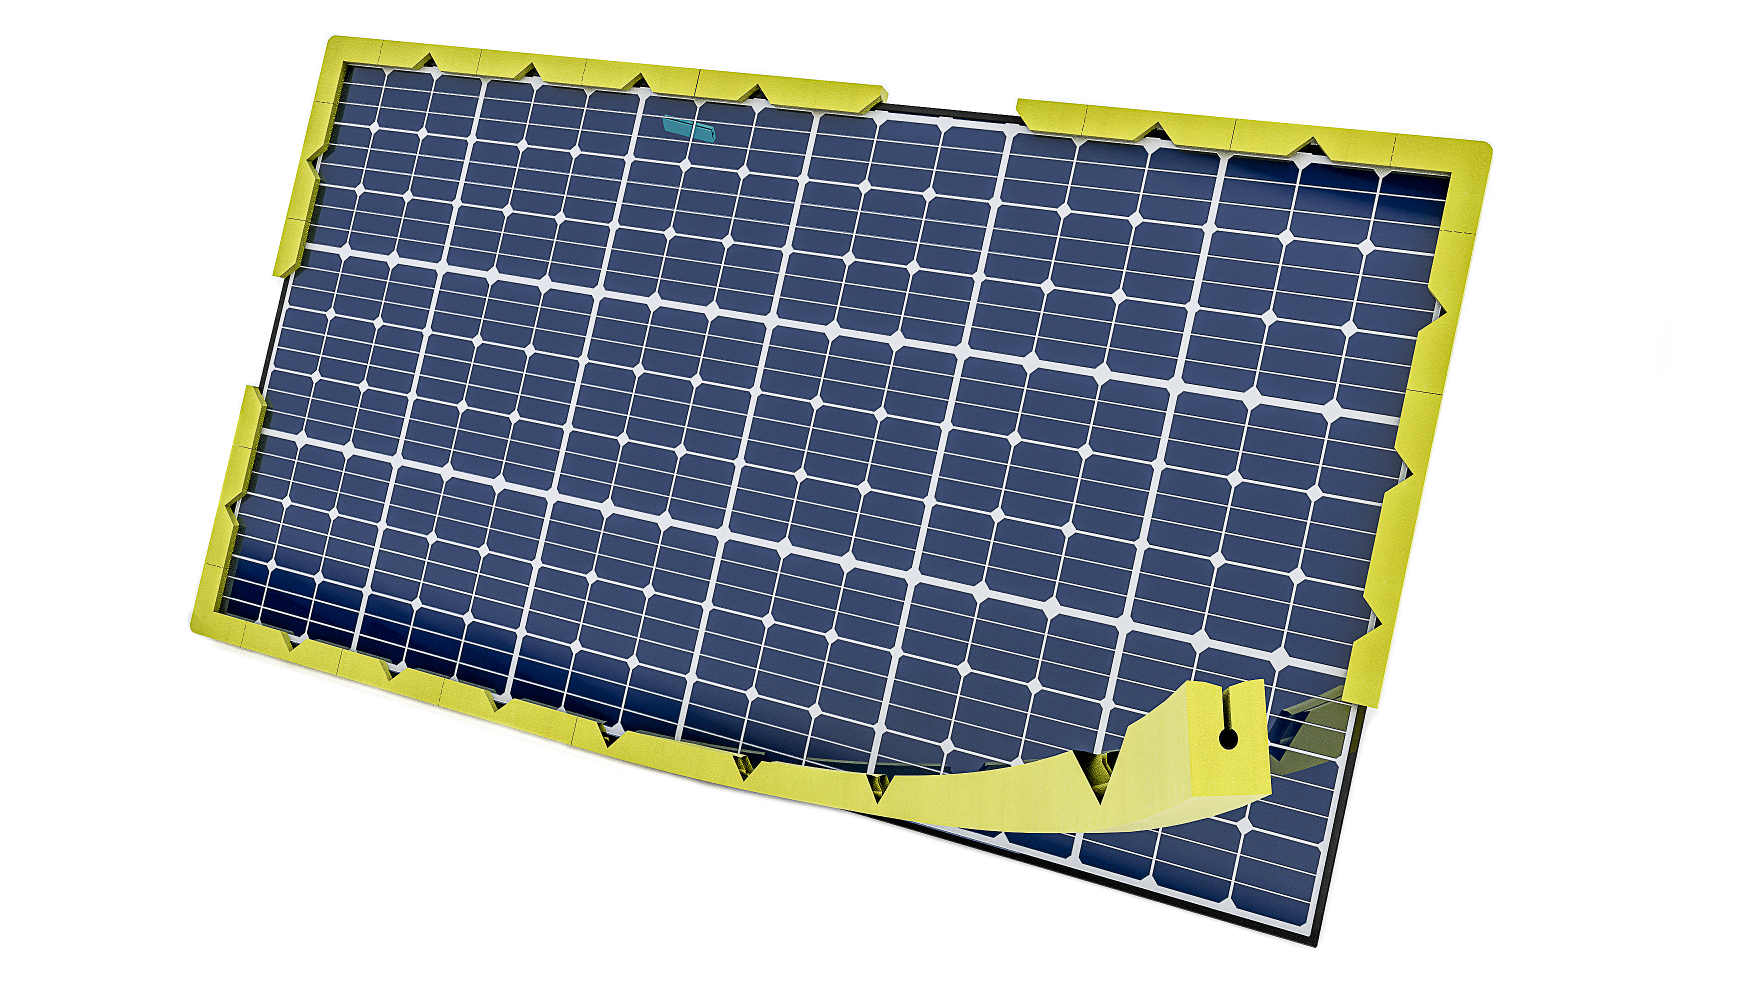 A solar panel is protected by a foam profile at the edges and corners